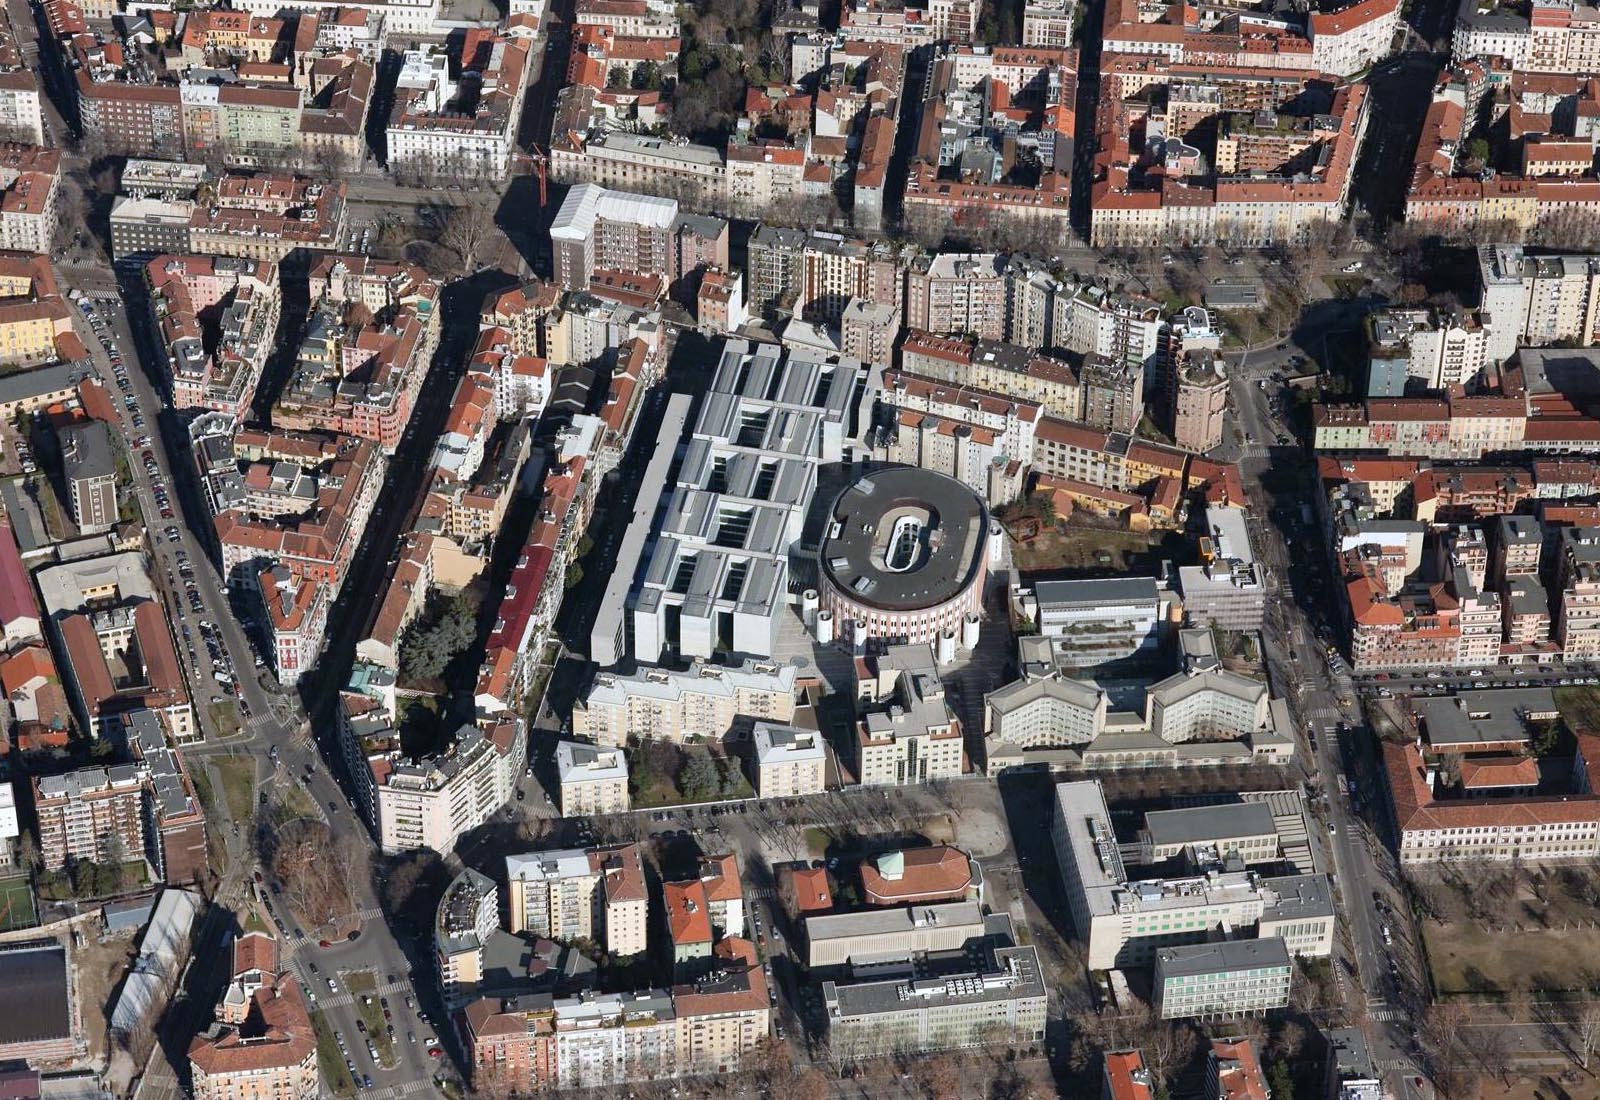 Bocconi university expansion impact - Aerial view of the Bocconi area